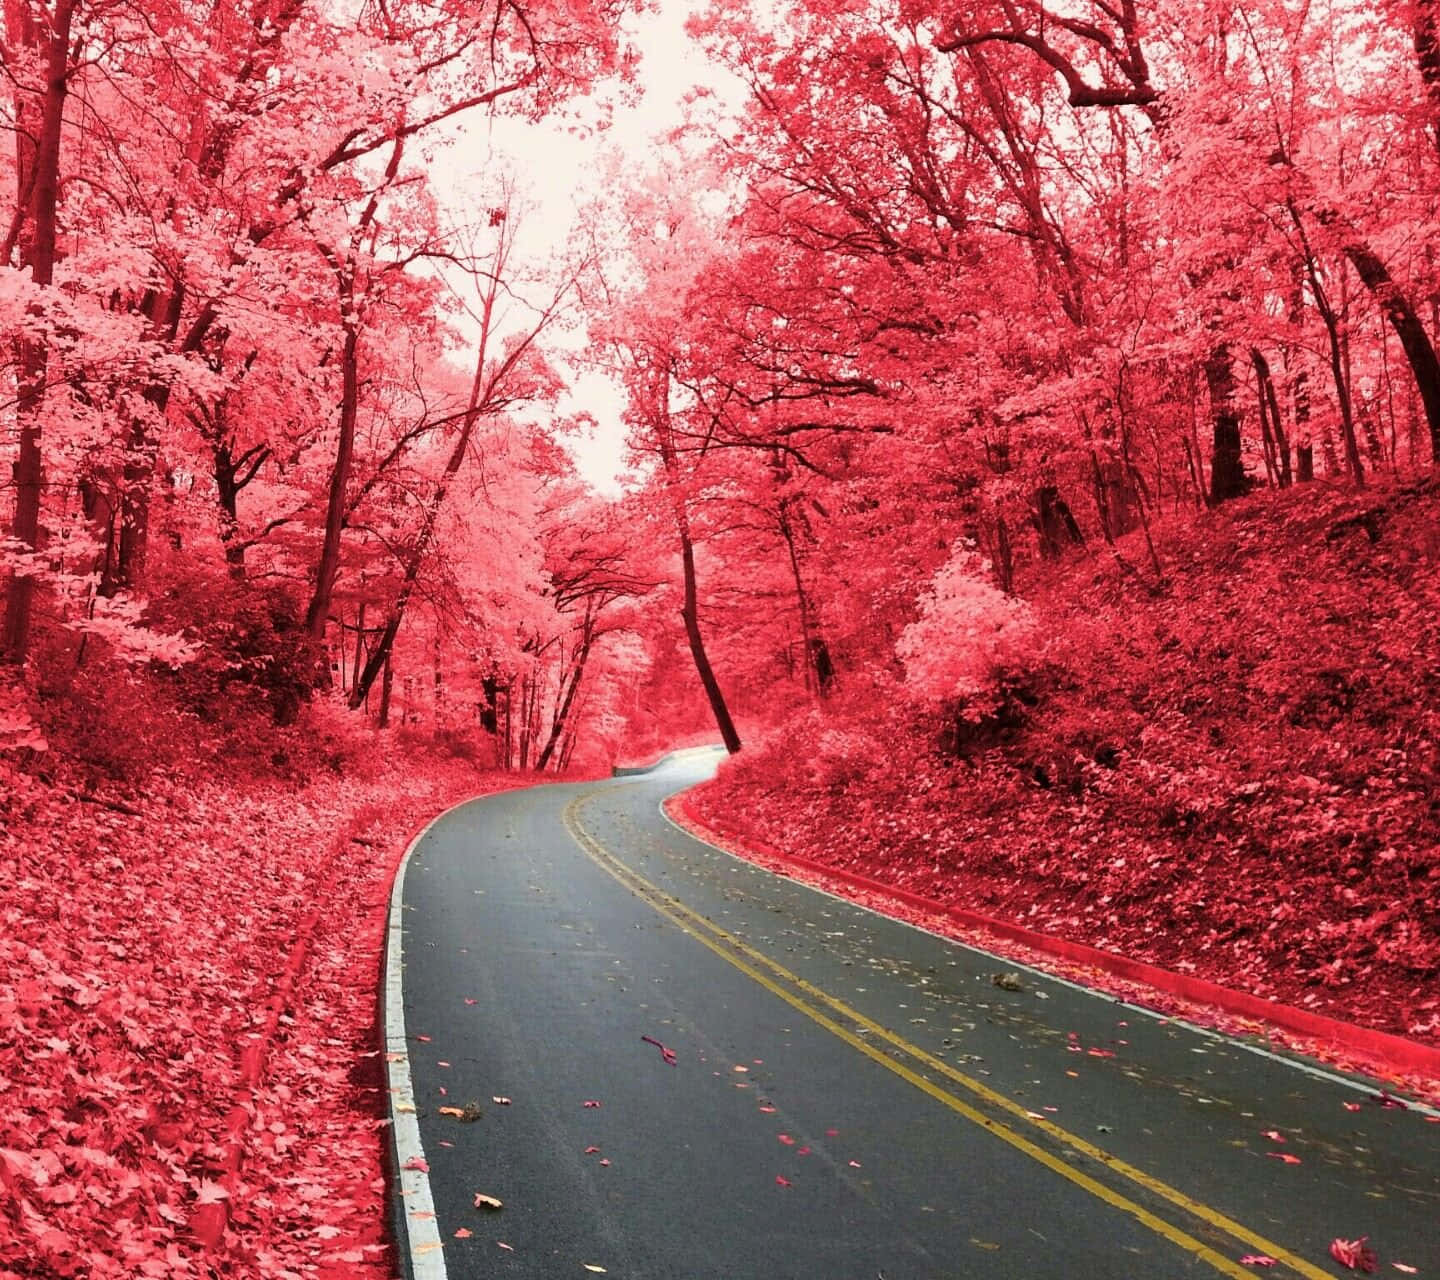 Enjoy the serenity of the crisp autumn air in a beautiful pink fall landscape. Wallpaper